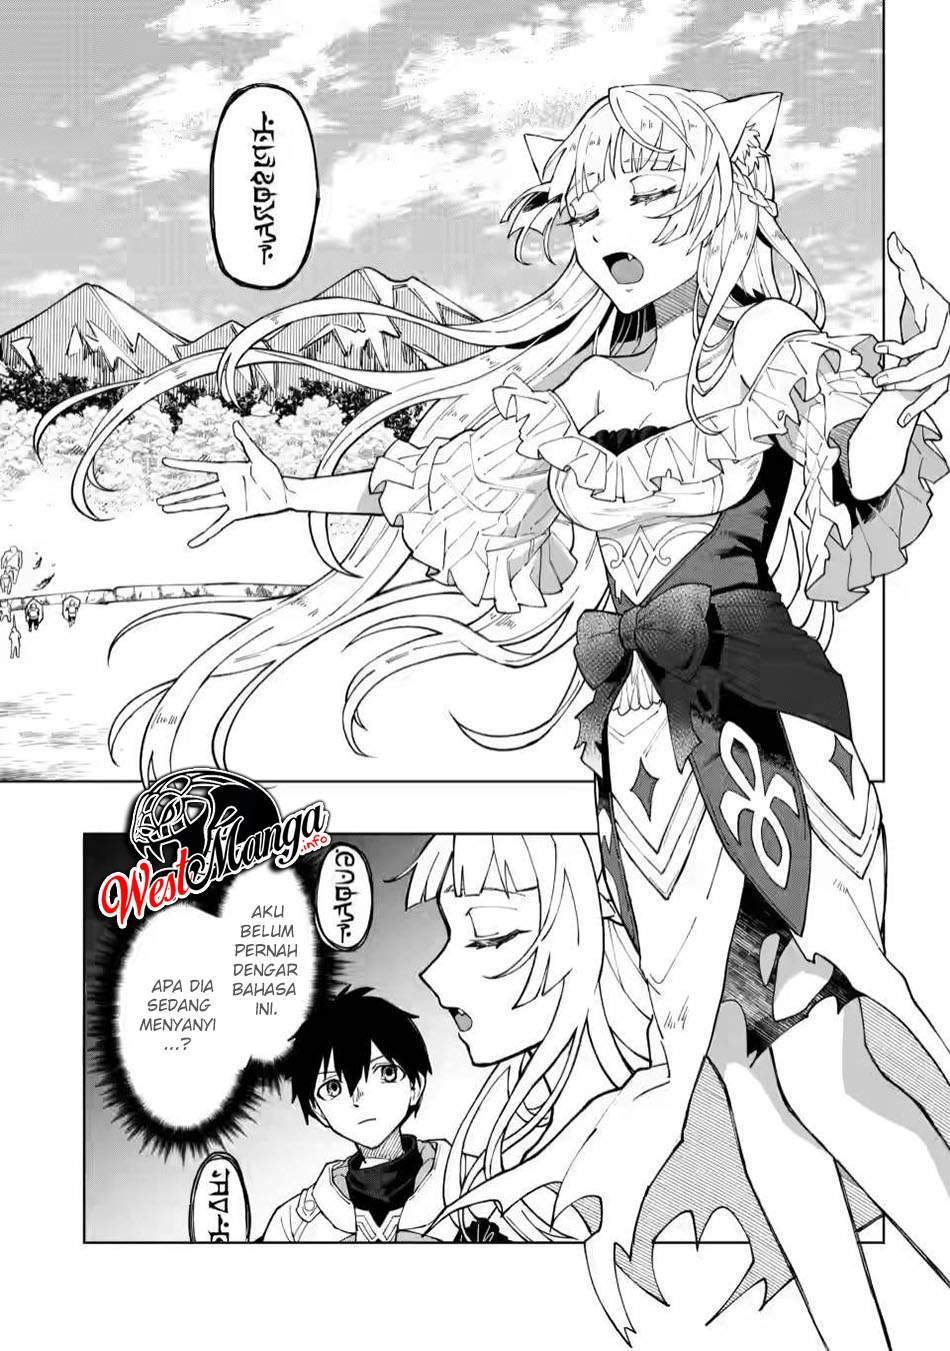 The White Mage Who Was Banished From the Hero’s Party Is Picked up by an S Rank Adventurer ~ This White Mage Is Too Out of the Ordinary! Chapter 8